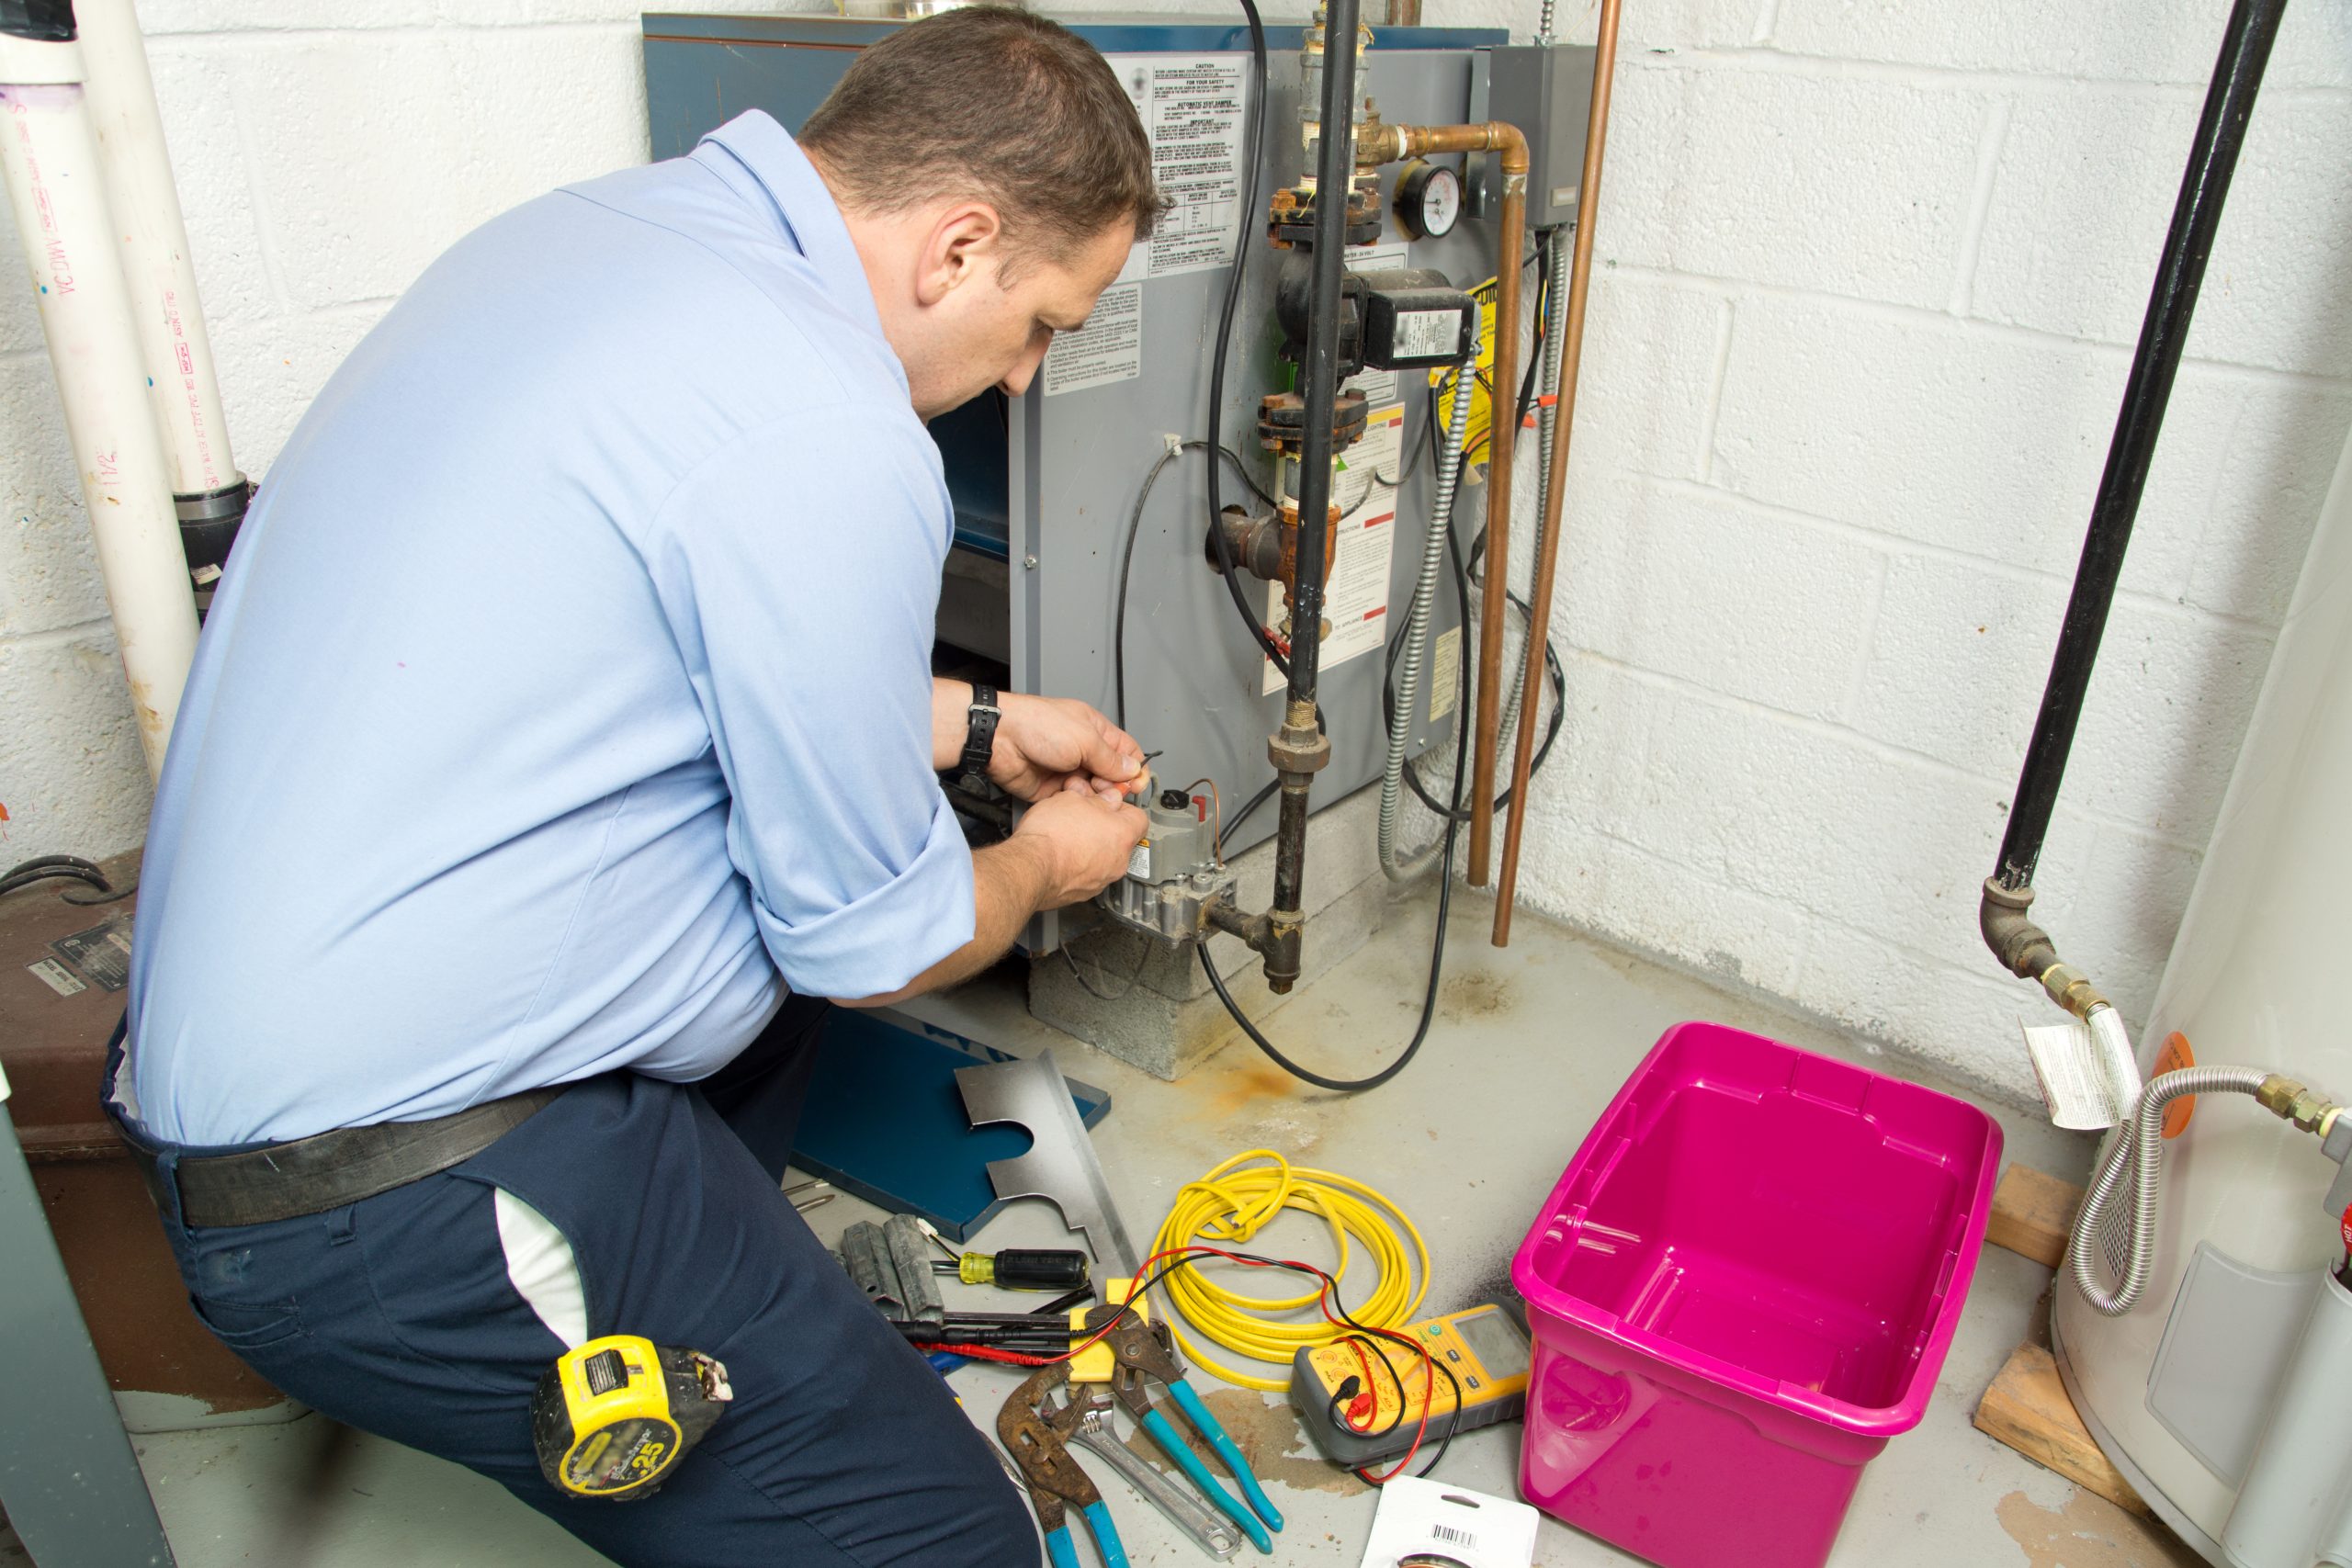 How Often Should I Have My Furnace Inspected?